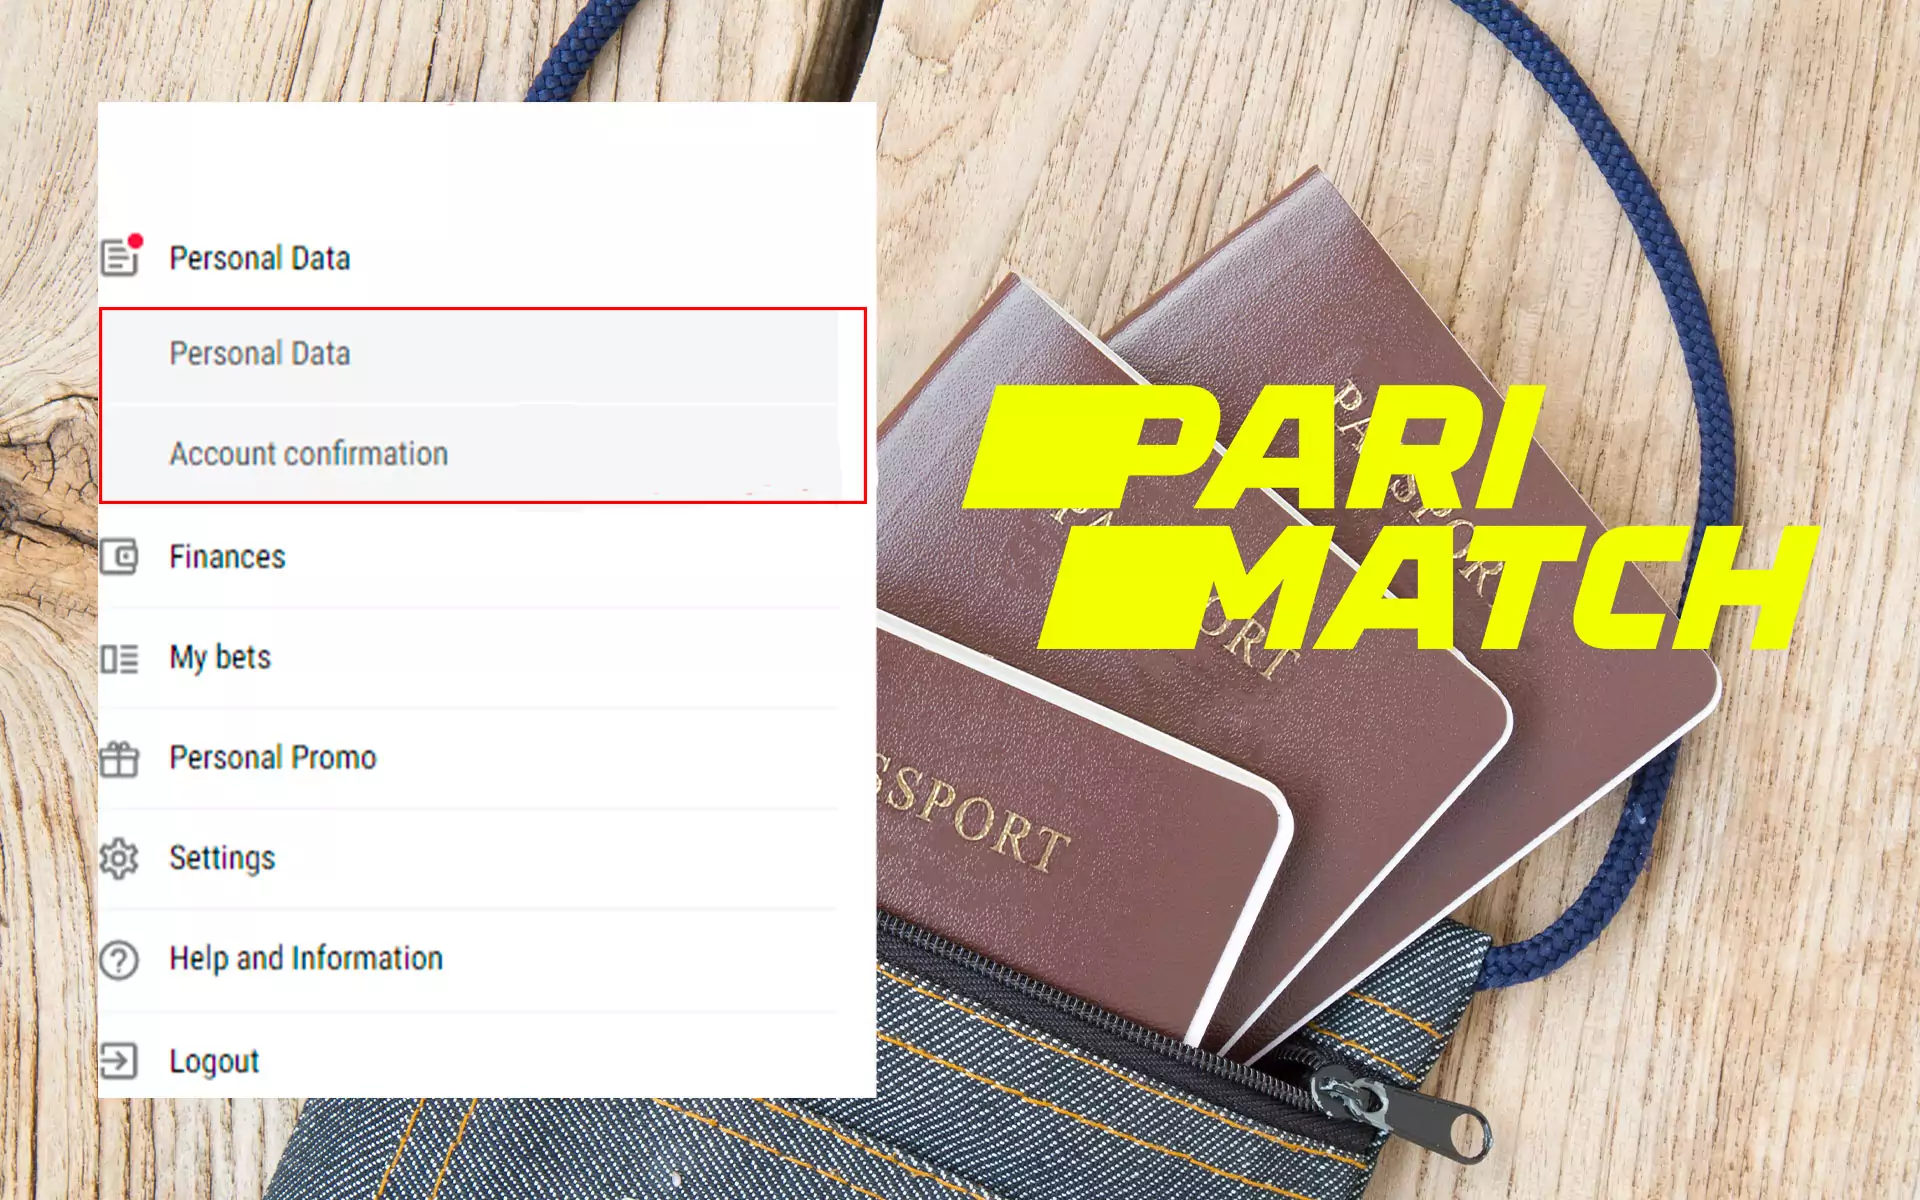 Only verified Parimatch players can bet on money and withdraw winnings from Parimatch.